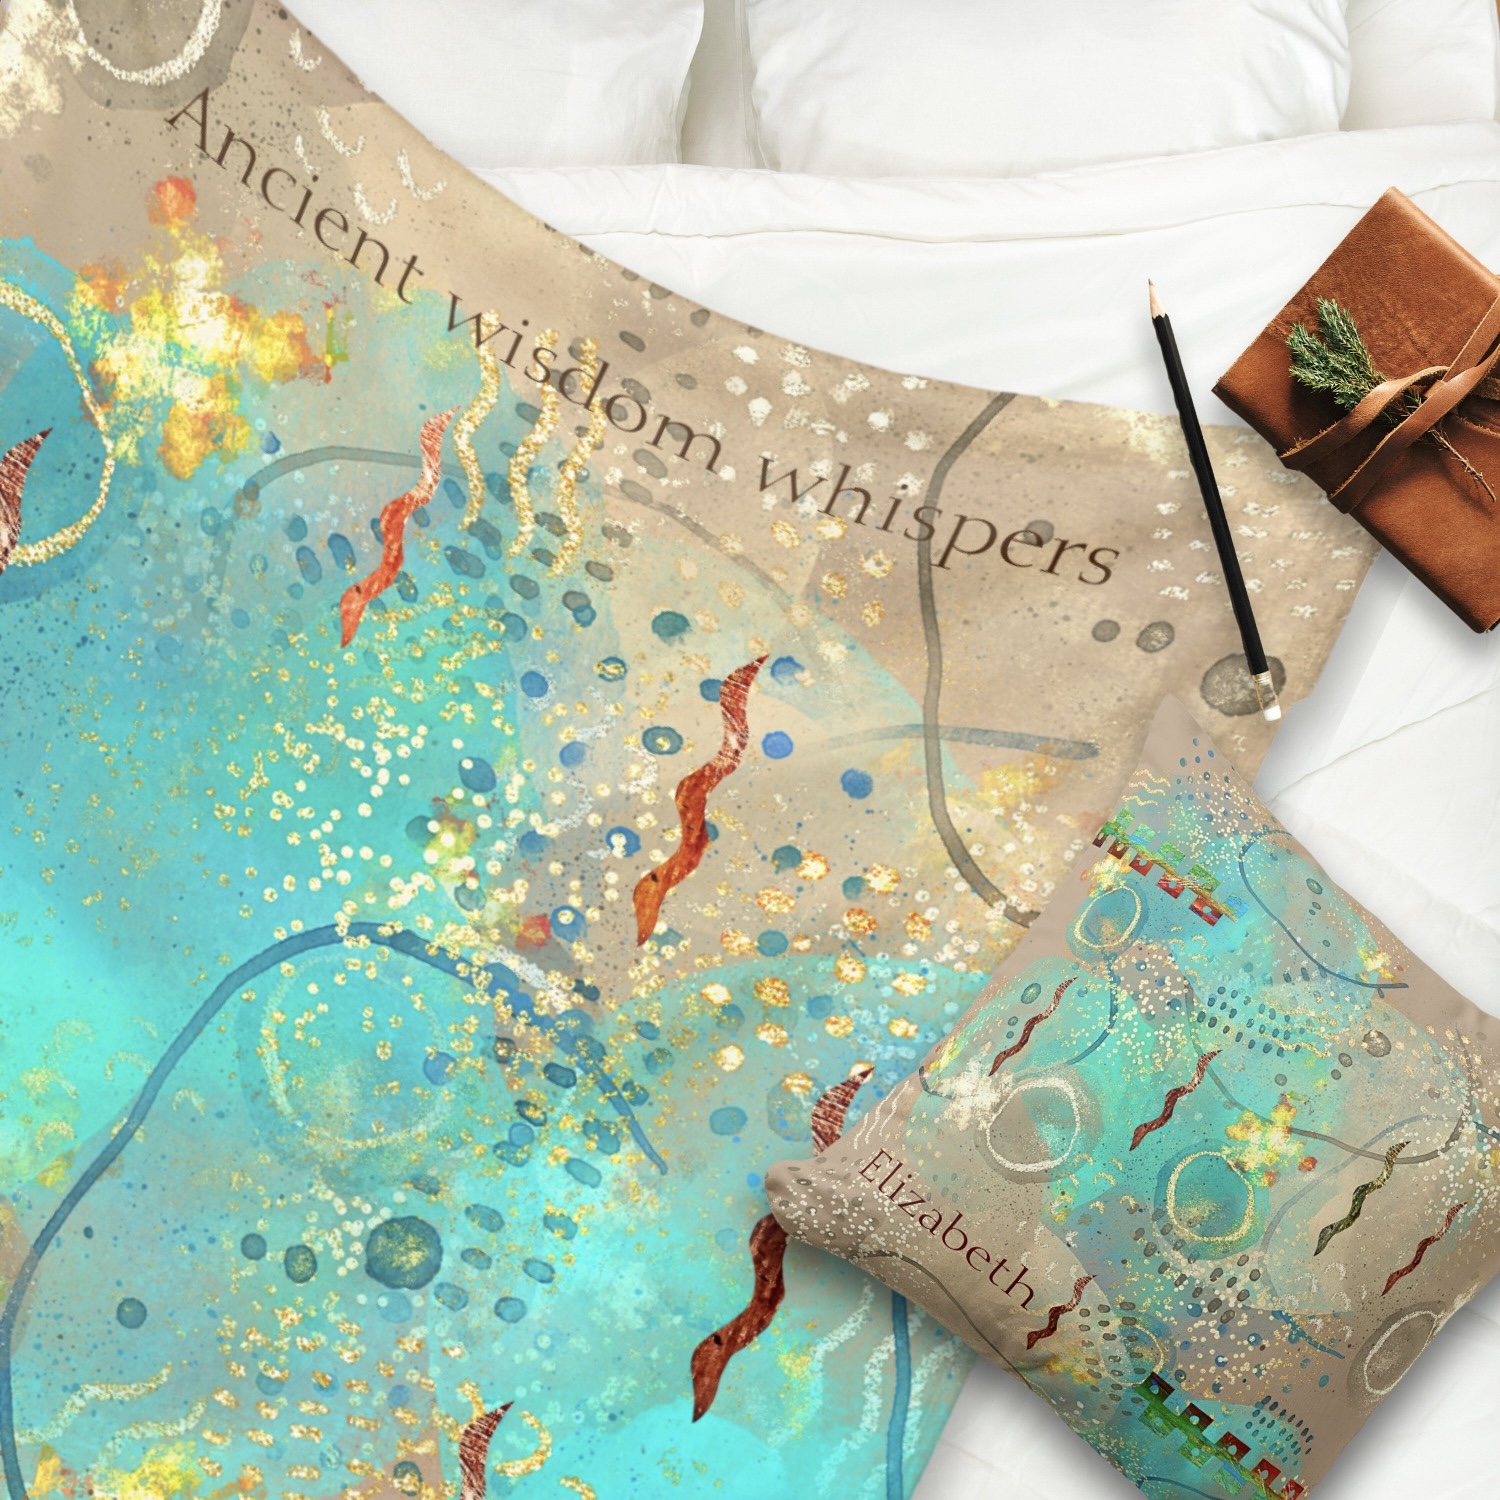 Indigenous-inspired Turquoise And Golden Fleece Blanket: Wrap yourself in comfort and tradition.